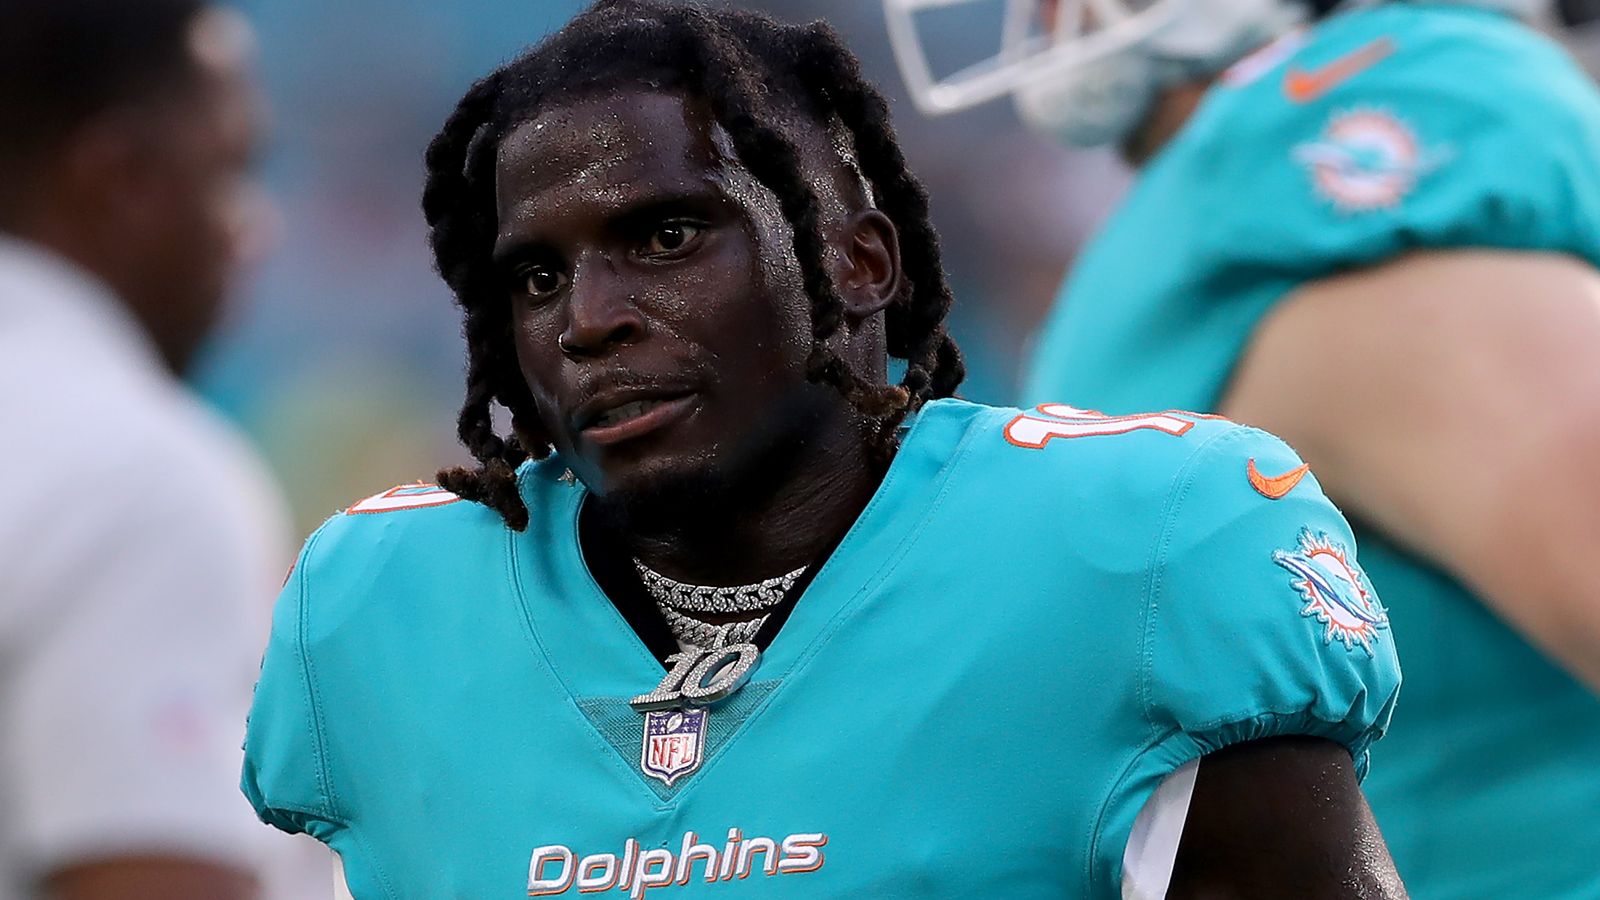 New England Patriots @ Miami Dolphins: Tyreek Hill, Tua Tagovailoa, Mac Jones among the players to watch out for in season opener